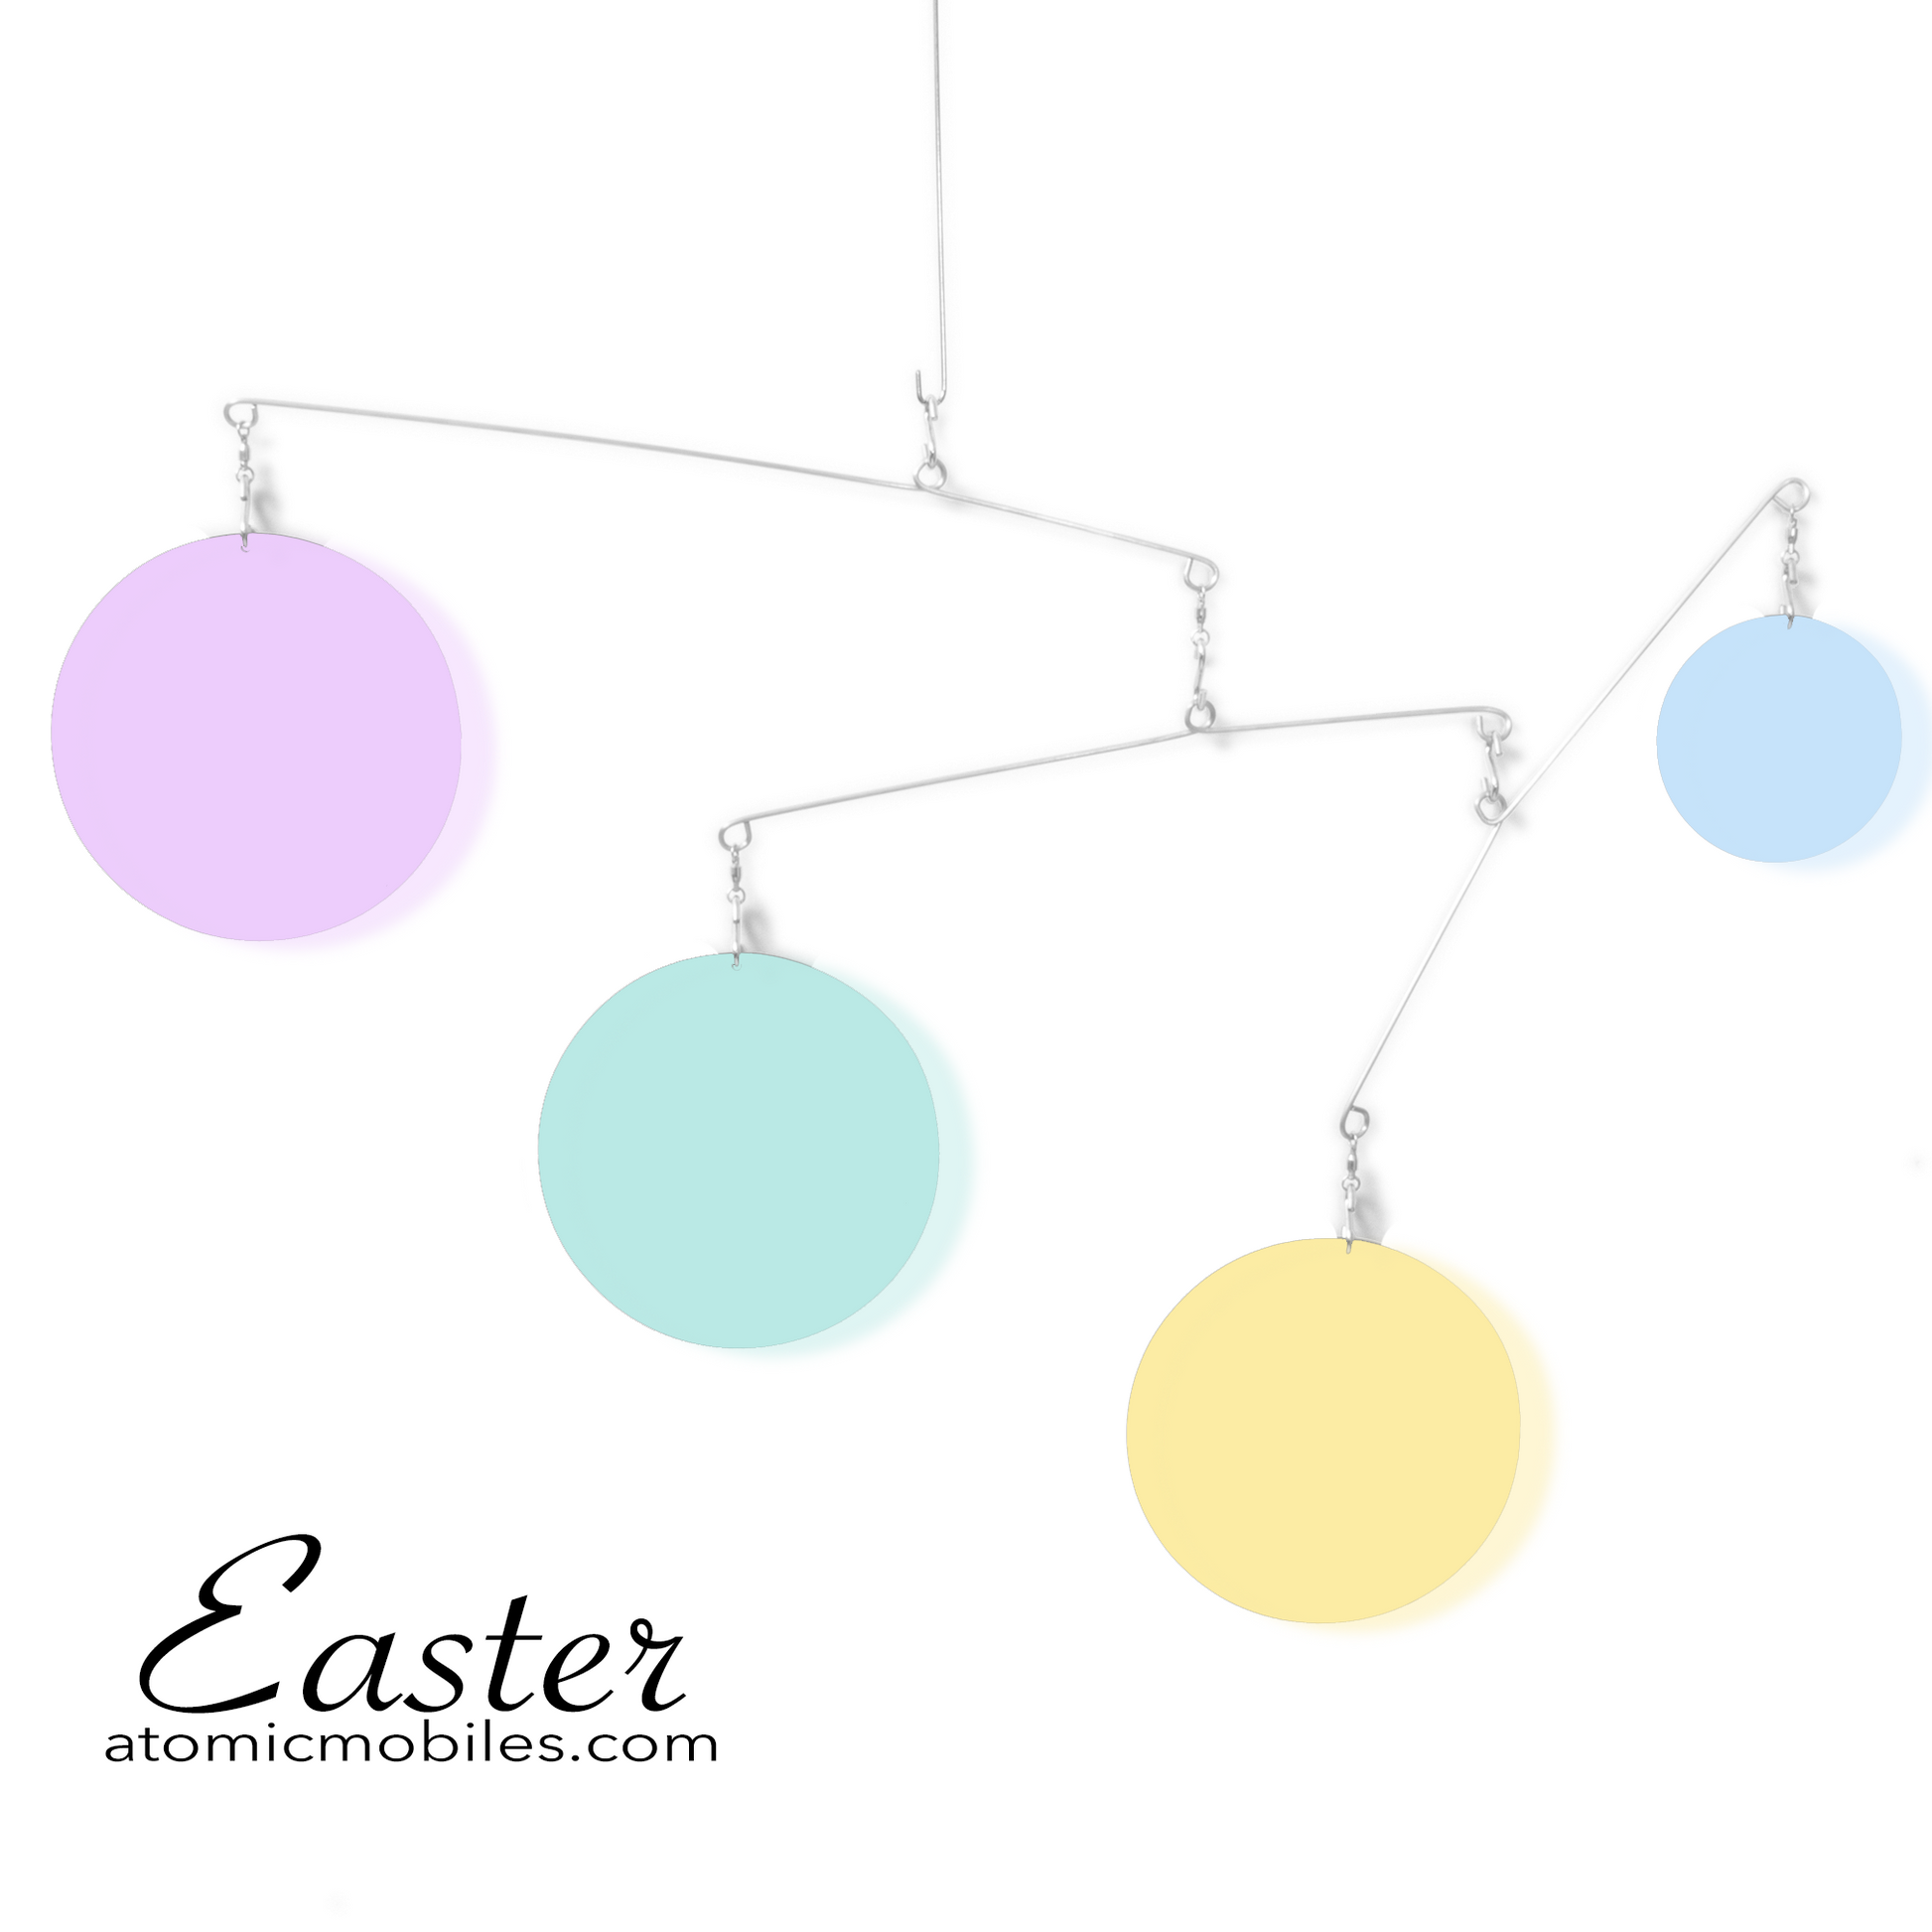 Unique Easter Decoration - kinetic hanging art mobile in Easter colors of semi-translucent pastel Purple, Aqua, Yellow, and Blue by AtomicMobiles.com